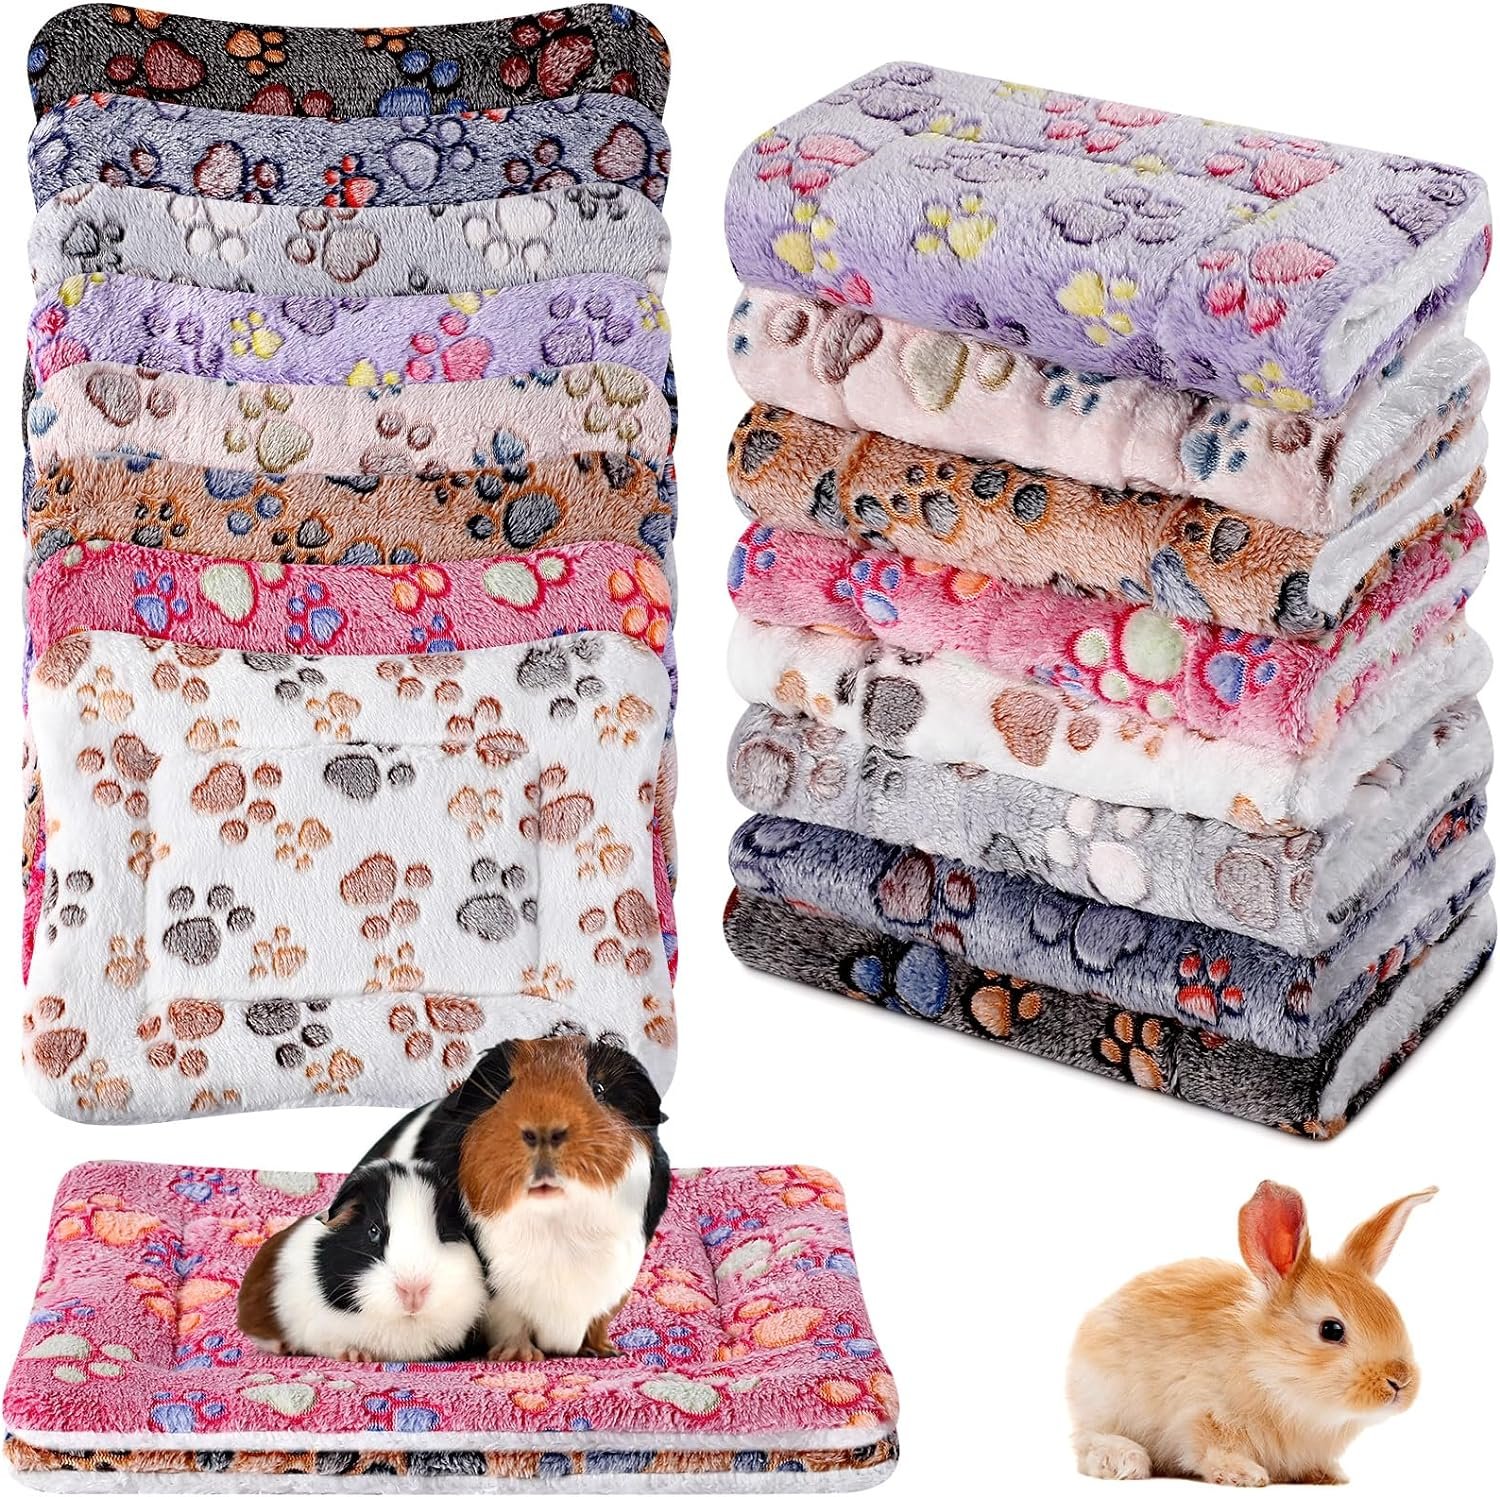 Ripeng 8 Pcs Bulk Guinea Pig Bed Mat Fleece Crate Cat Bed Hamster Bedding Paw Print Blanket Bed for Small Animal Winter Thickened Plush Bunny Dog Bed Washable Kennel Pad (Multicolor,12.6 x 9.8)